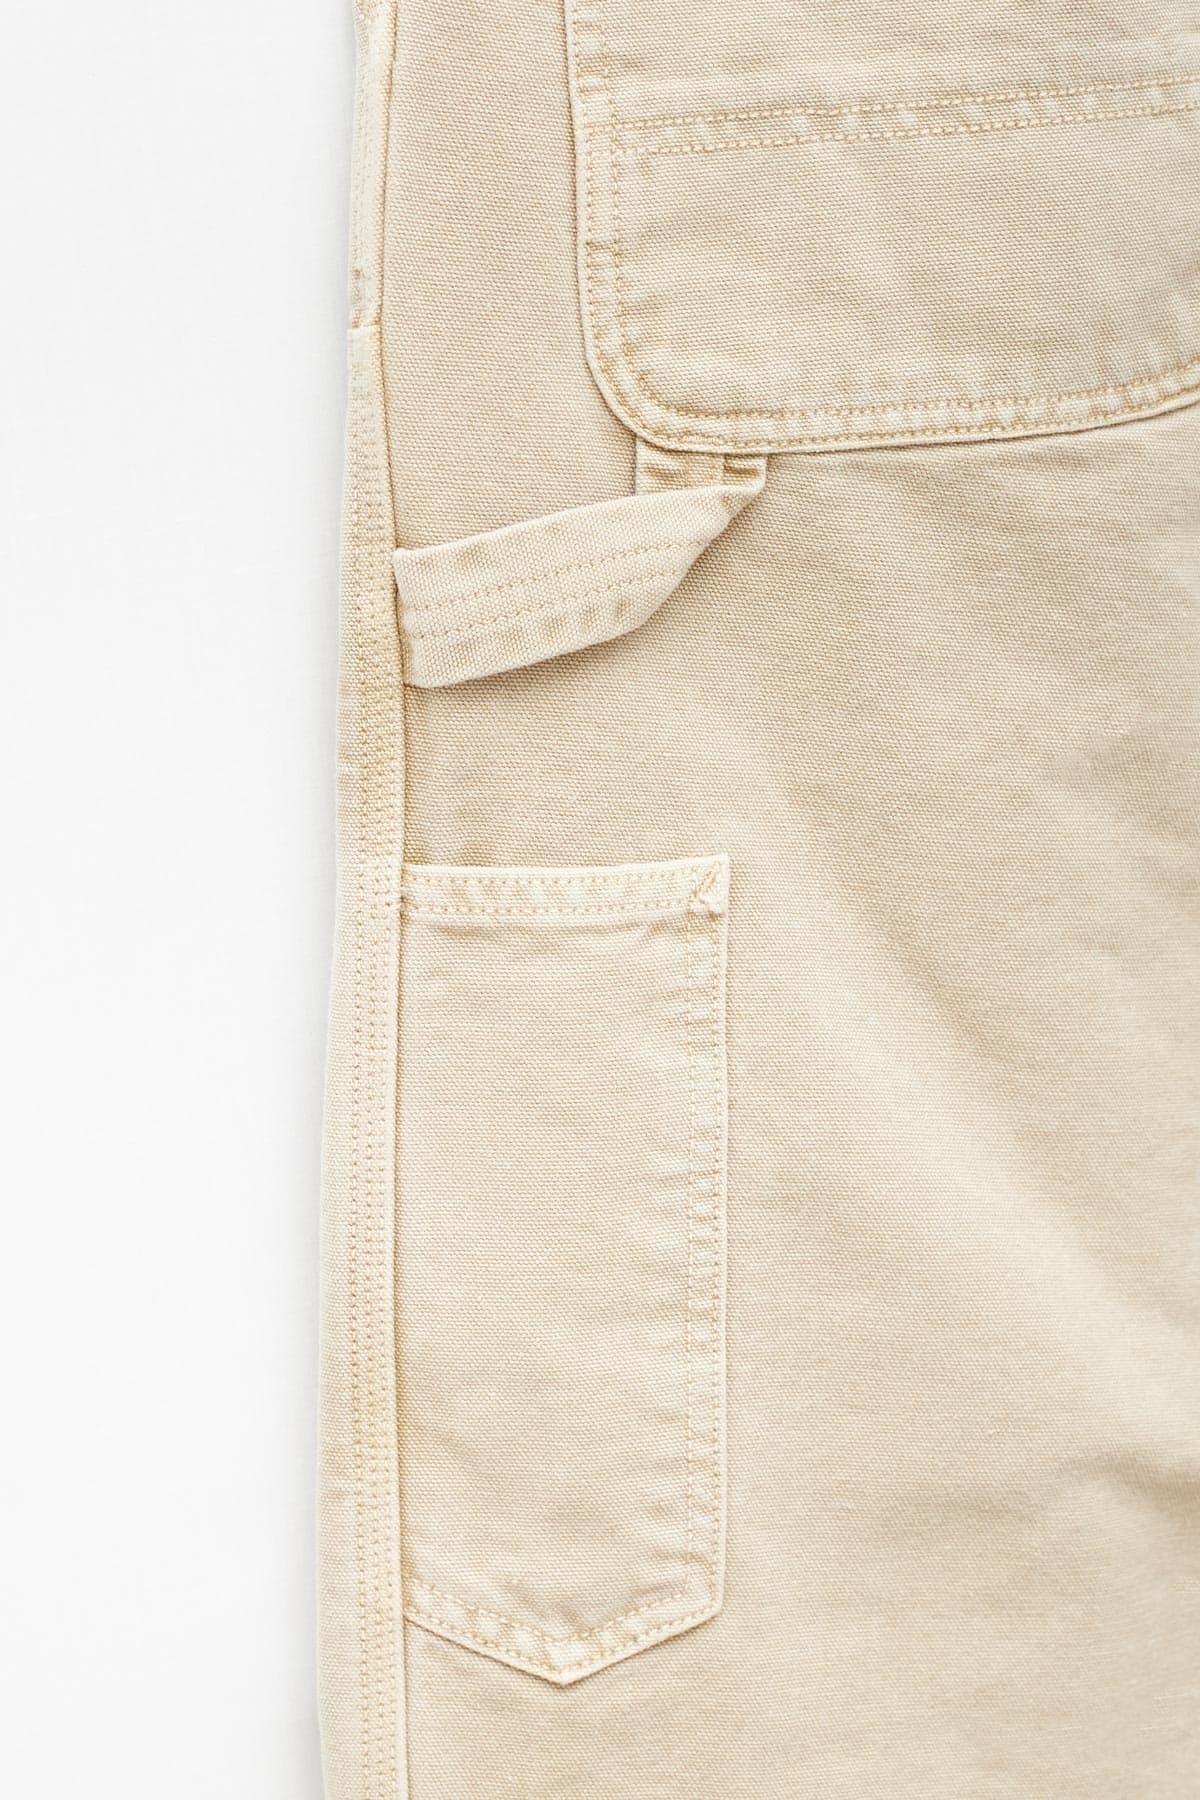 Carhartt WIP Double Knee Pant Dearborn Canvas 'Black Rinsed' | HALO - HALO